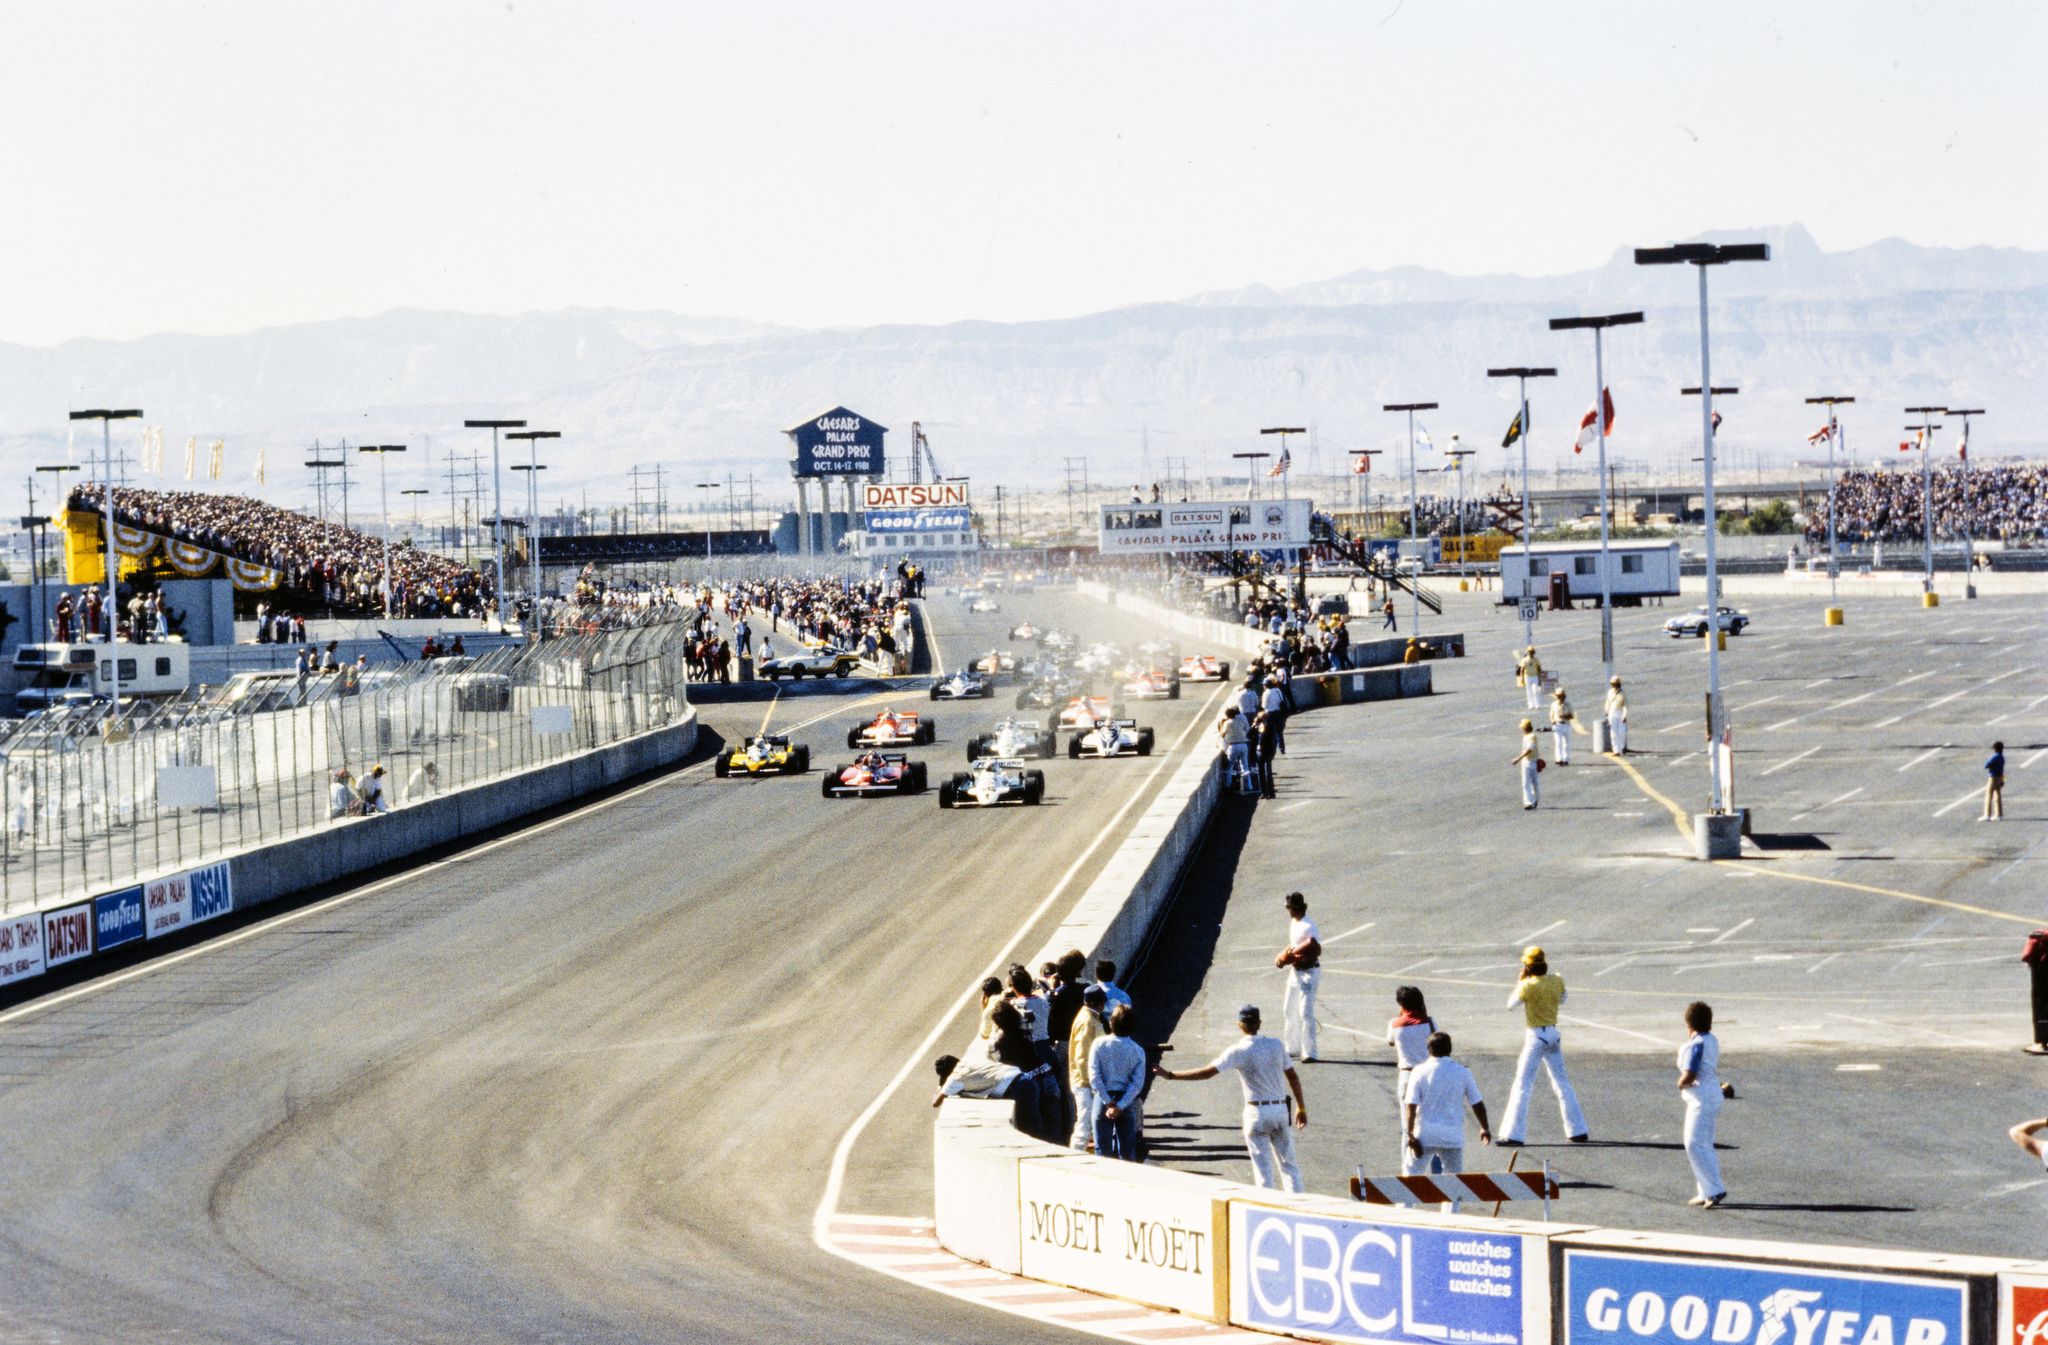 streets of las vegas, united states of america october 17 alan jones, williams fw07d ford, leads gilles villeneuve, ferrari 126ck, and alain prost, renault re30, at the start during the caesars palace gp at streets of las vegas on october 17, 1981 in streets of las vegas, united states of america photo by lat images